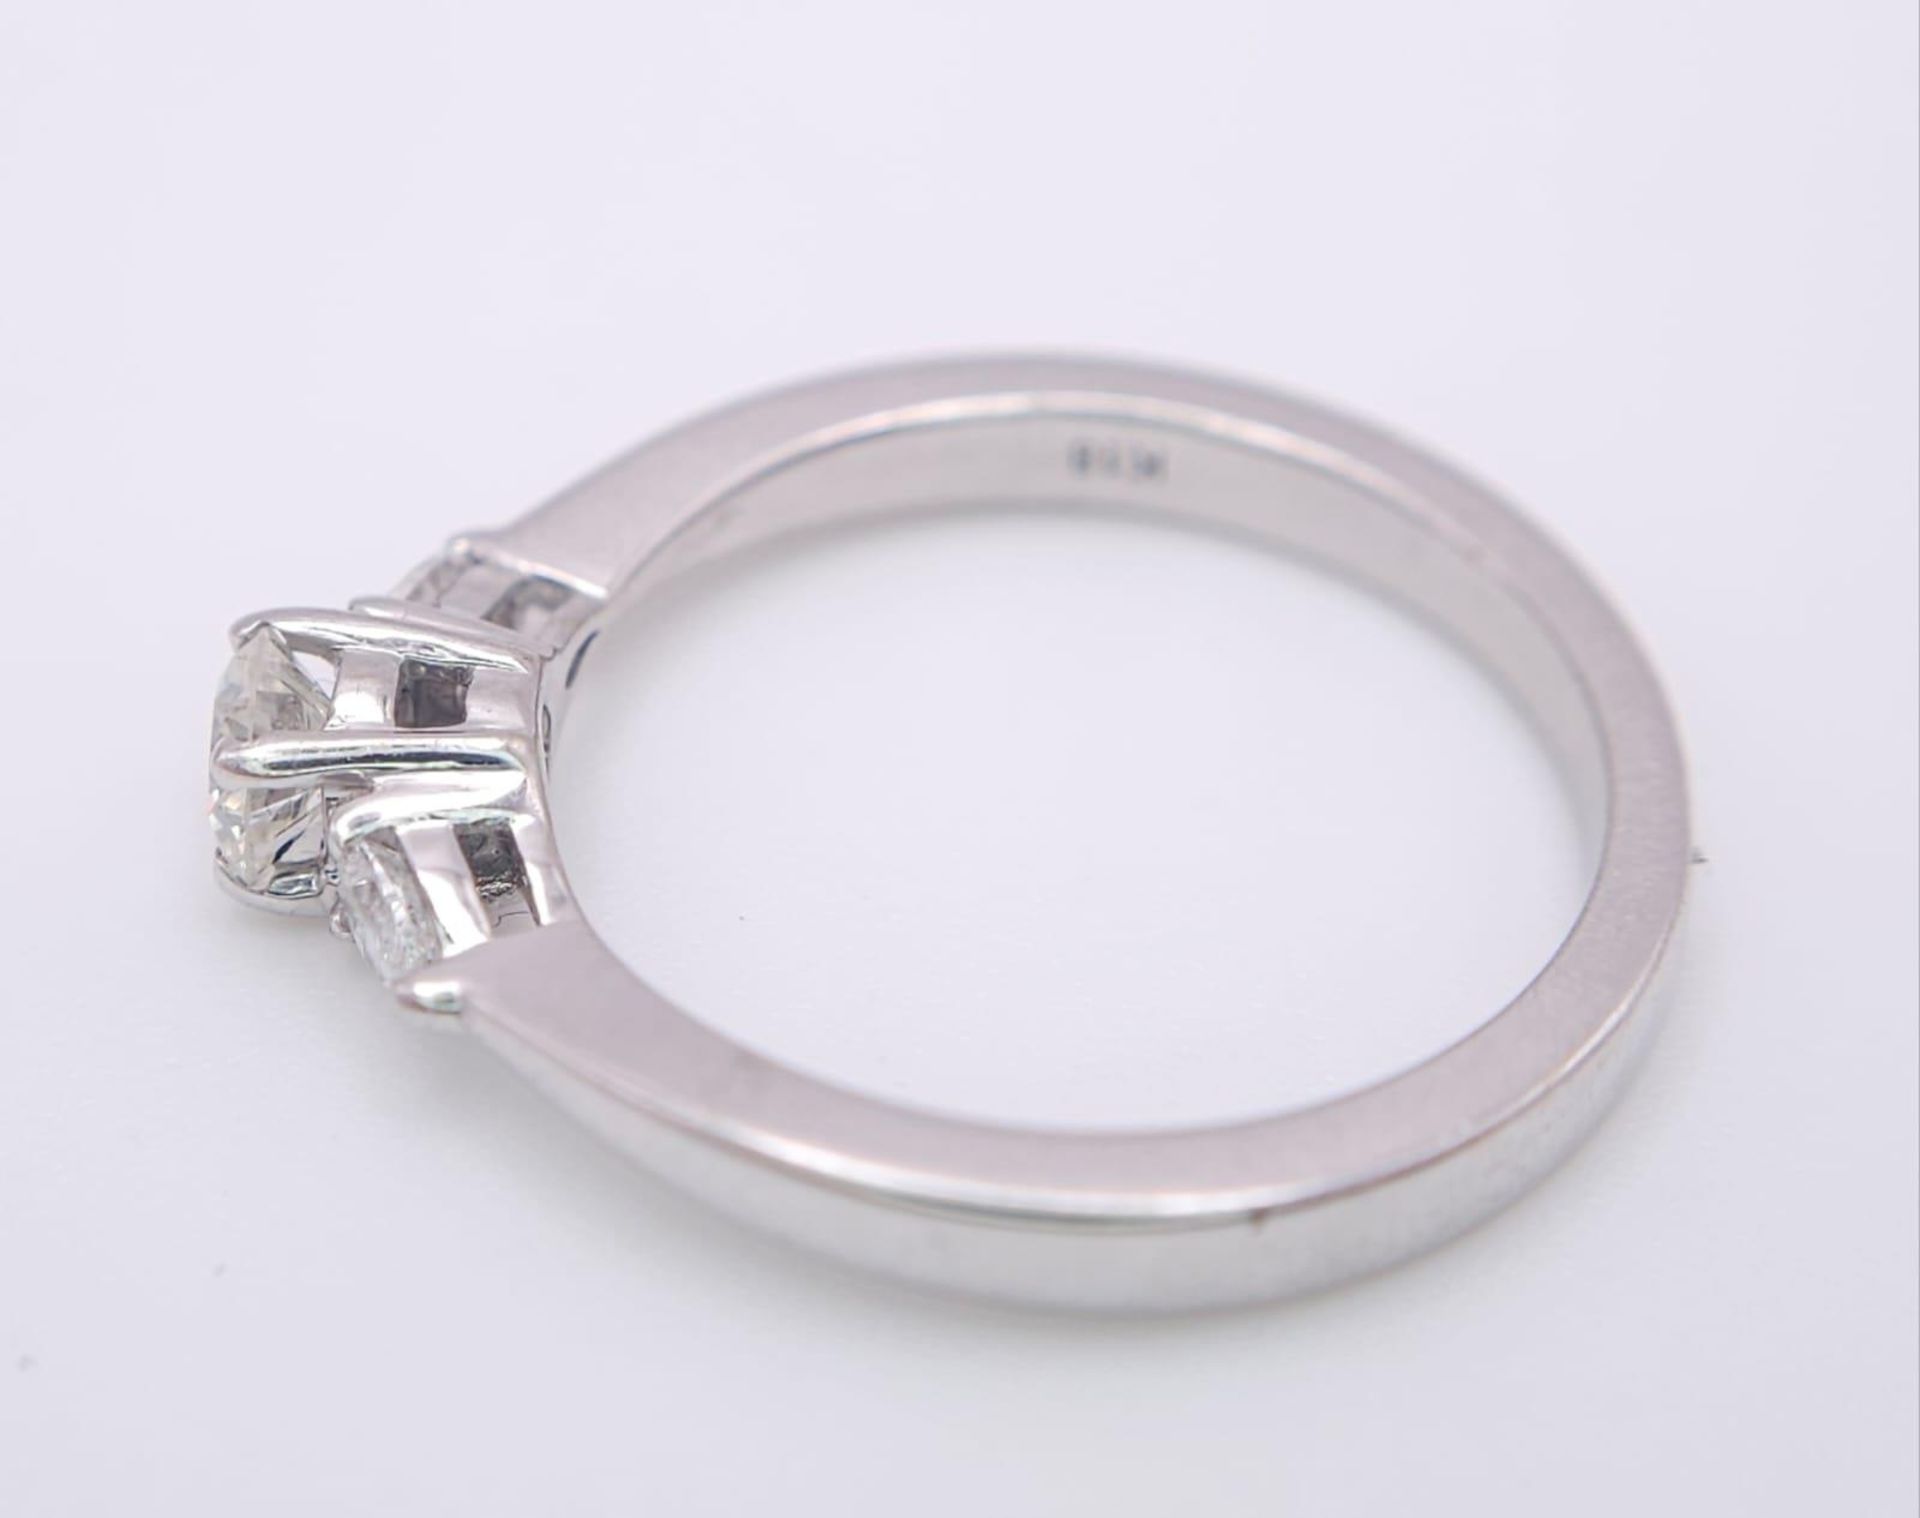 AN 18K WHITE GOLD DIAMOND RING WITH PEAR SHAPED DIAMOND ACCENTS ON SHOULDERS. 0.40CTW OF PEAR SHAPED - Bild 3 aus 7